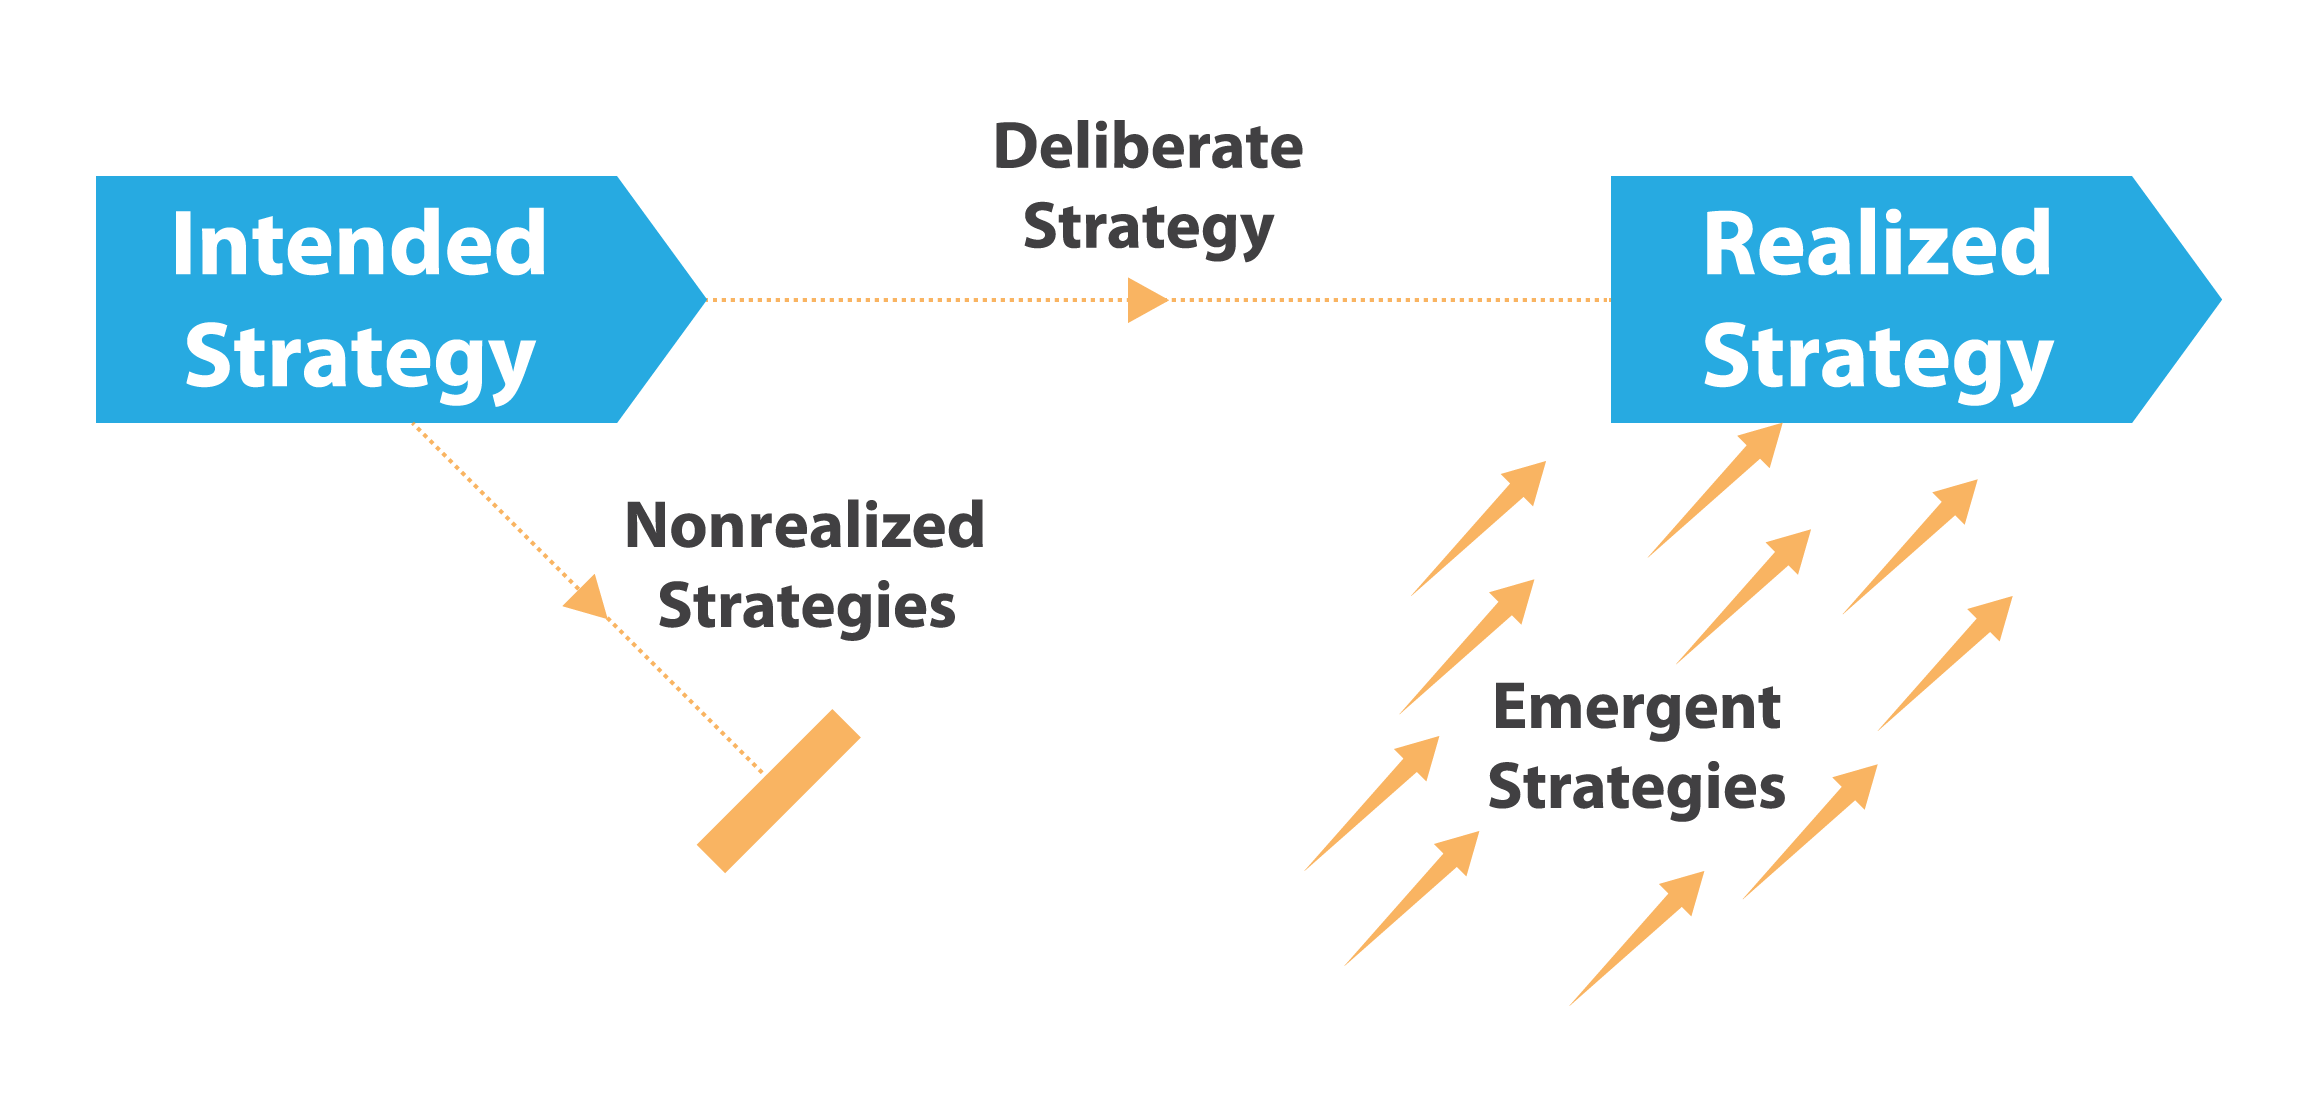 Figure 1-6: Intended, Deliberate, and Realized Strategies